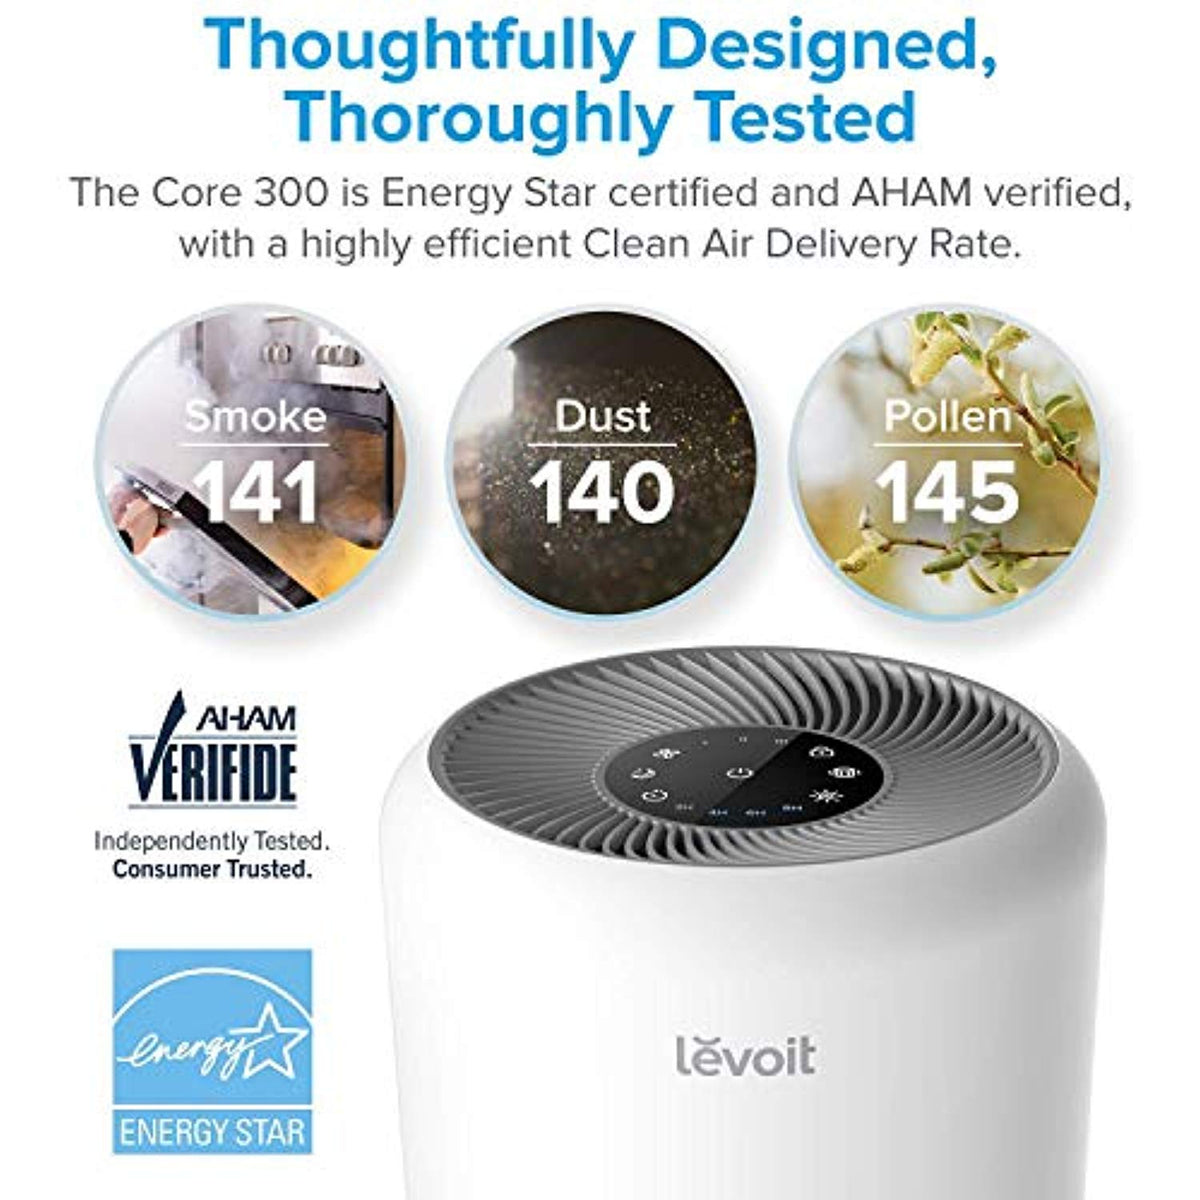 Levoit Air Purifier for Home Large Room with True HEPA Filter, Cleaner for Allergies and Pets, Smokers, Mold, Pollen, Dust, Quiet Odor Eliminators